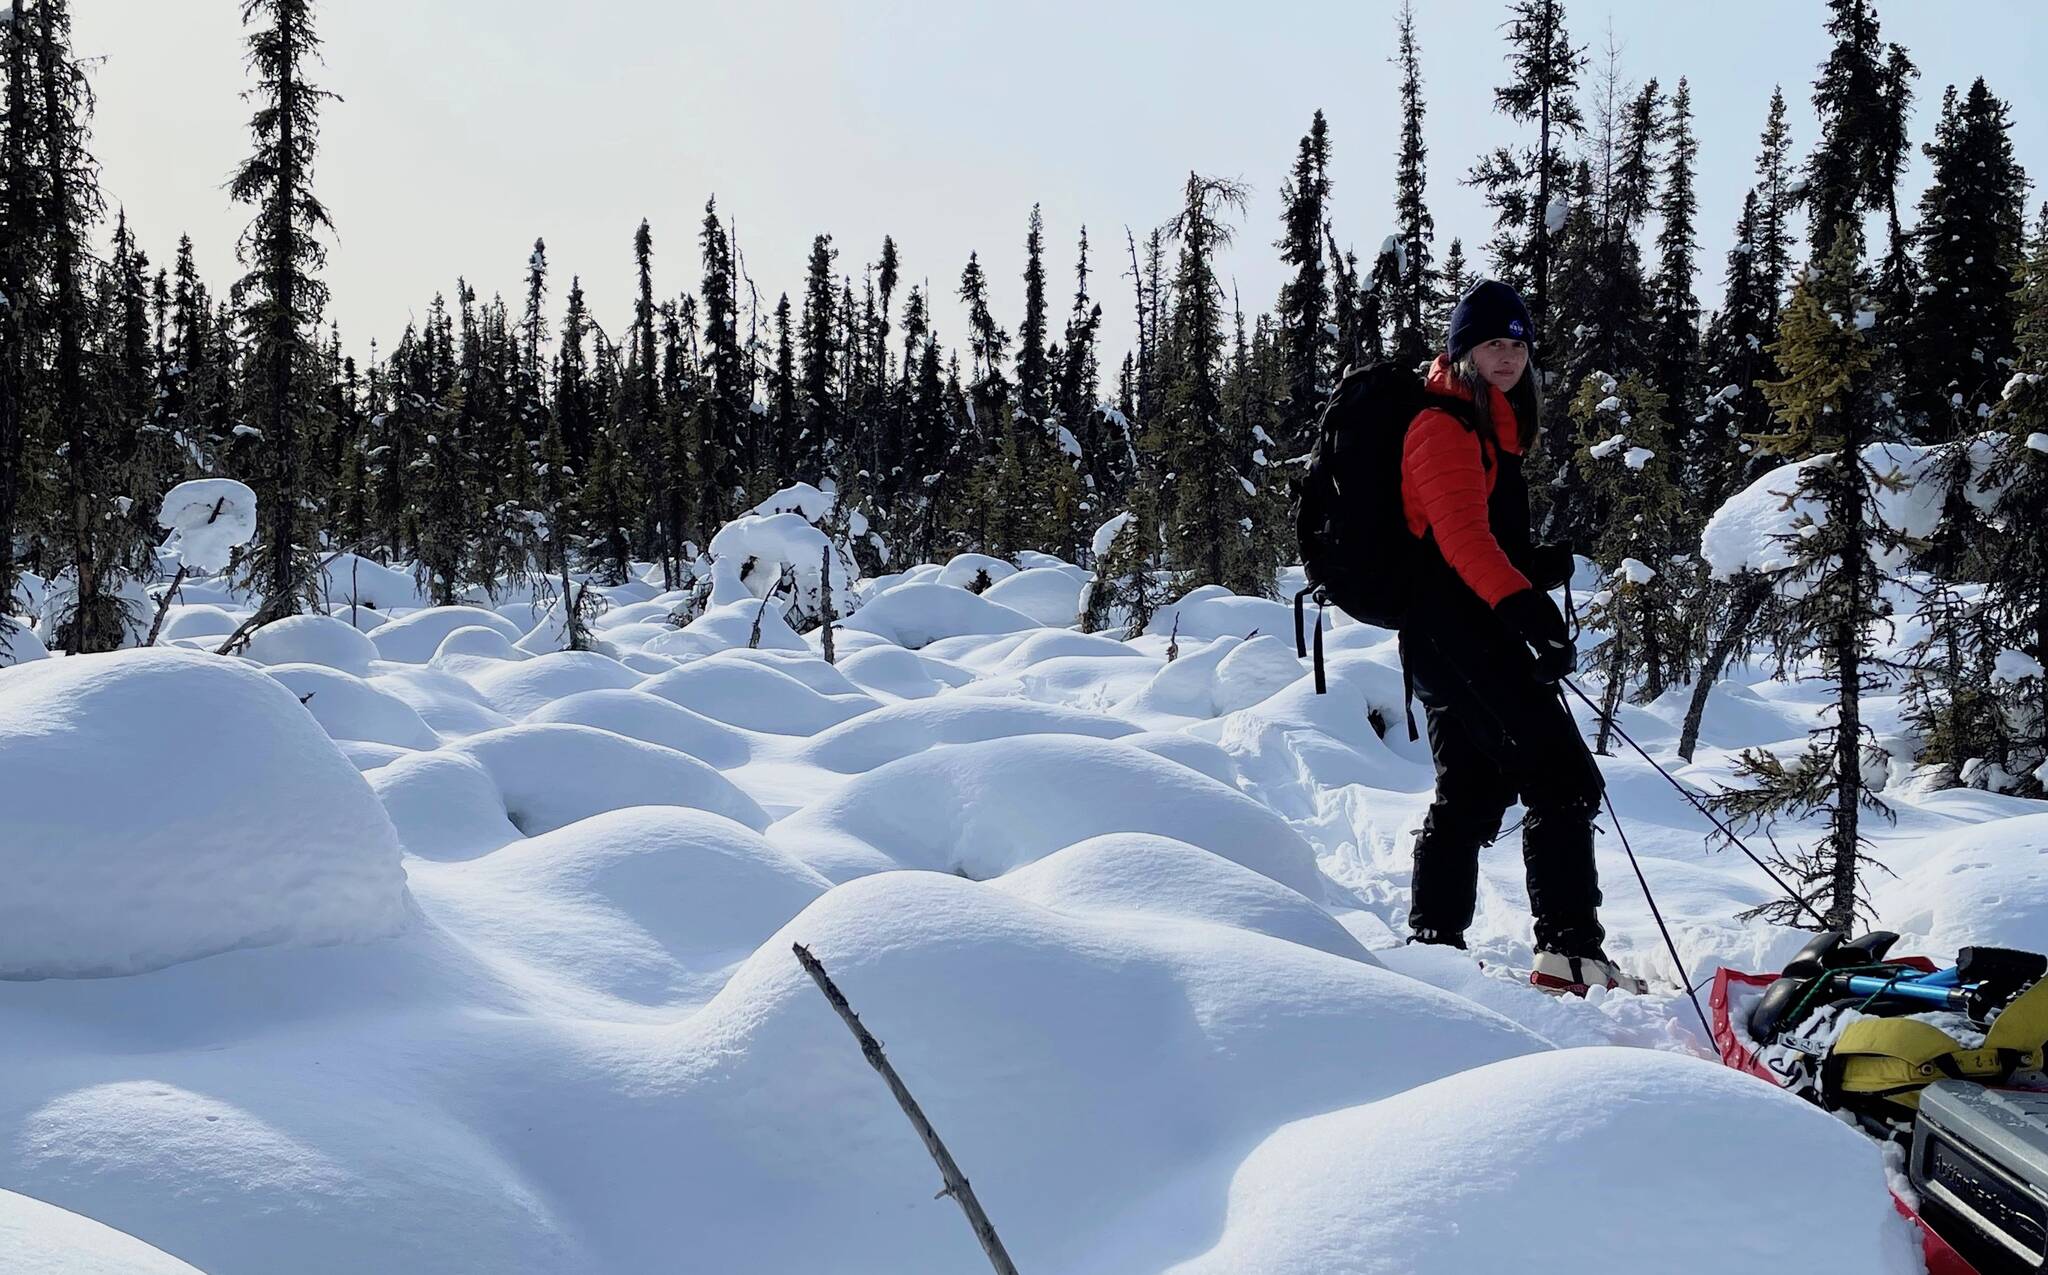 On March 15, 2023, Carrie Vuyovich of NASA Goddard Space Flight Center in Maryland drags a sled through the boreal forest north of Fairbanks as she moves equipment to measure the snowpack. (Courtesy Photo / Ned Rozell)